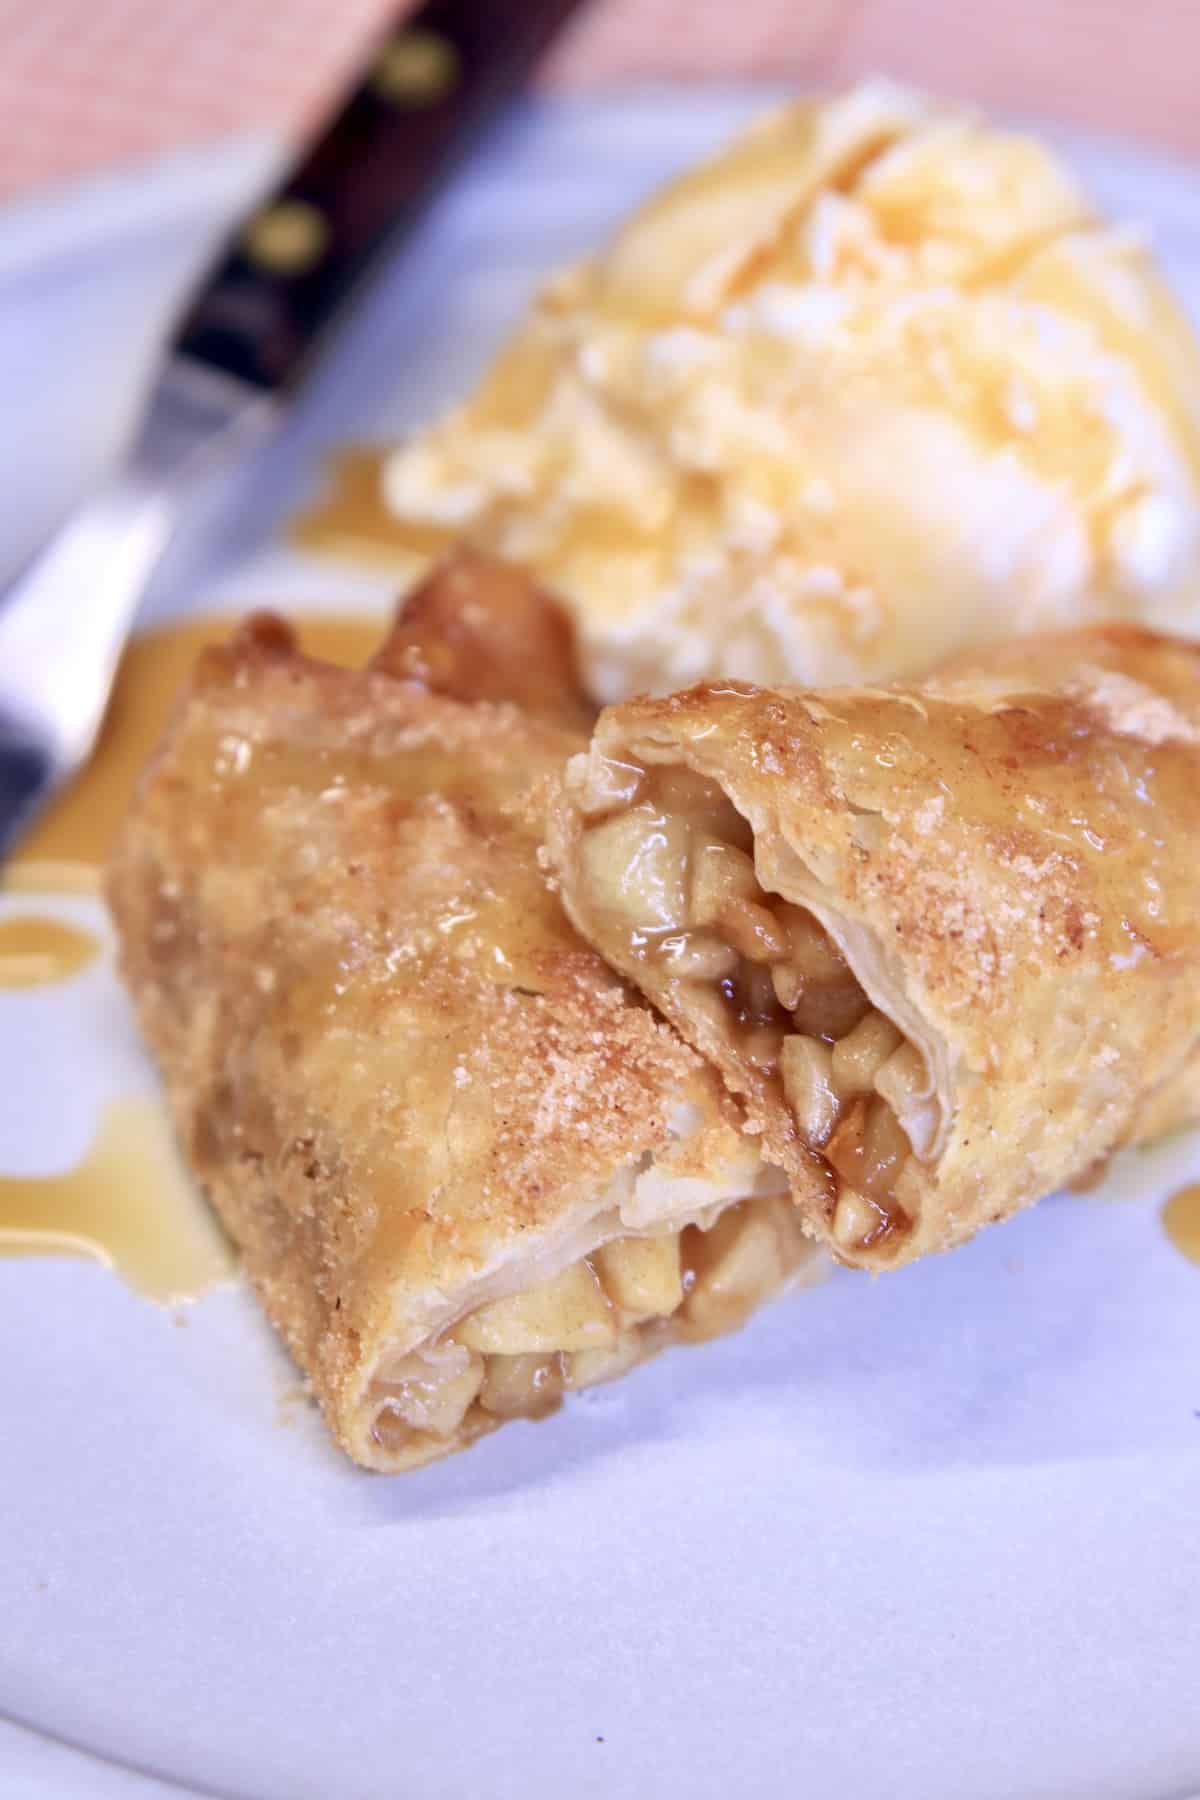 Apple Pie Egg Roll cut in half on a plate with vanilla ice cream and caramel sauce.